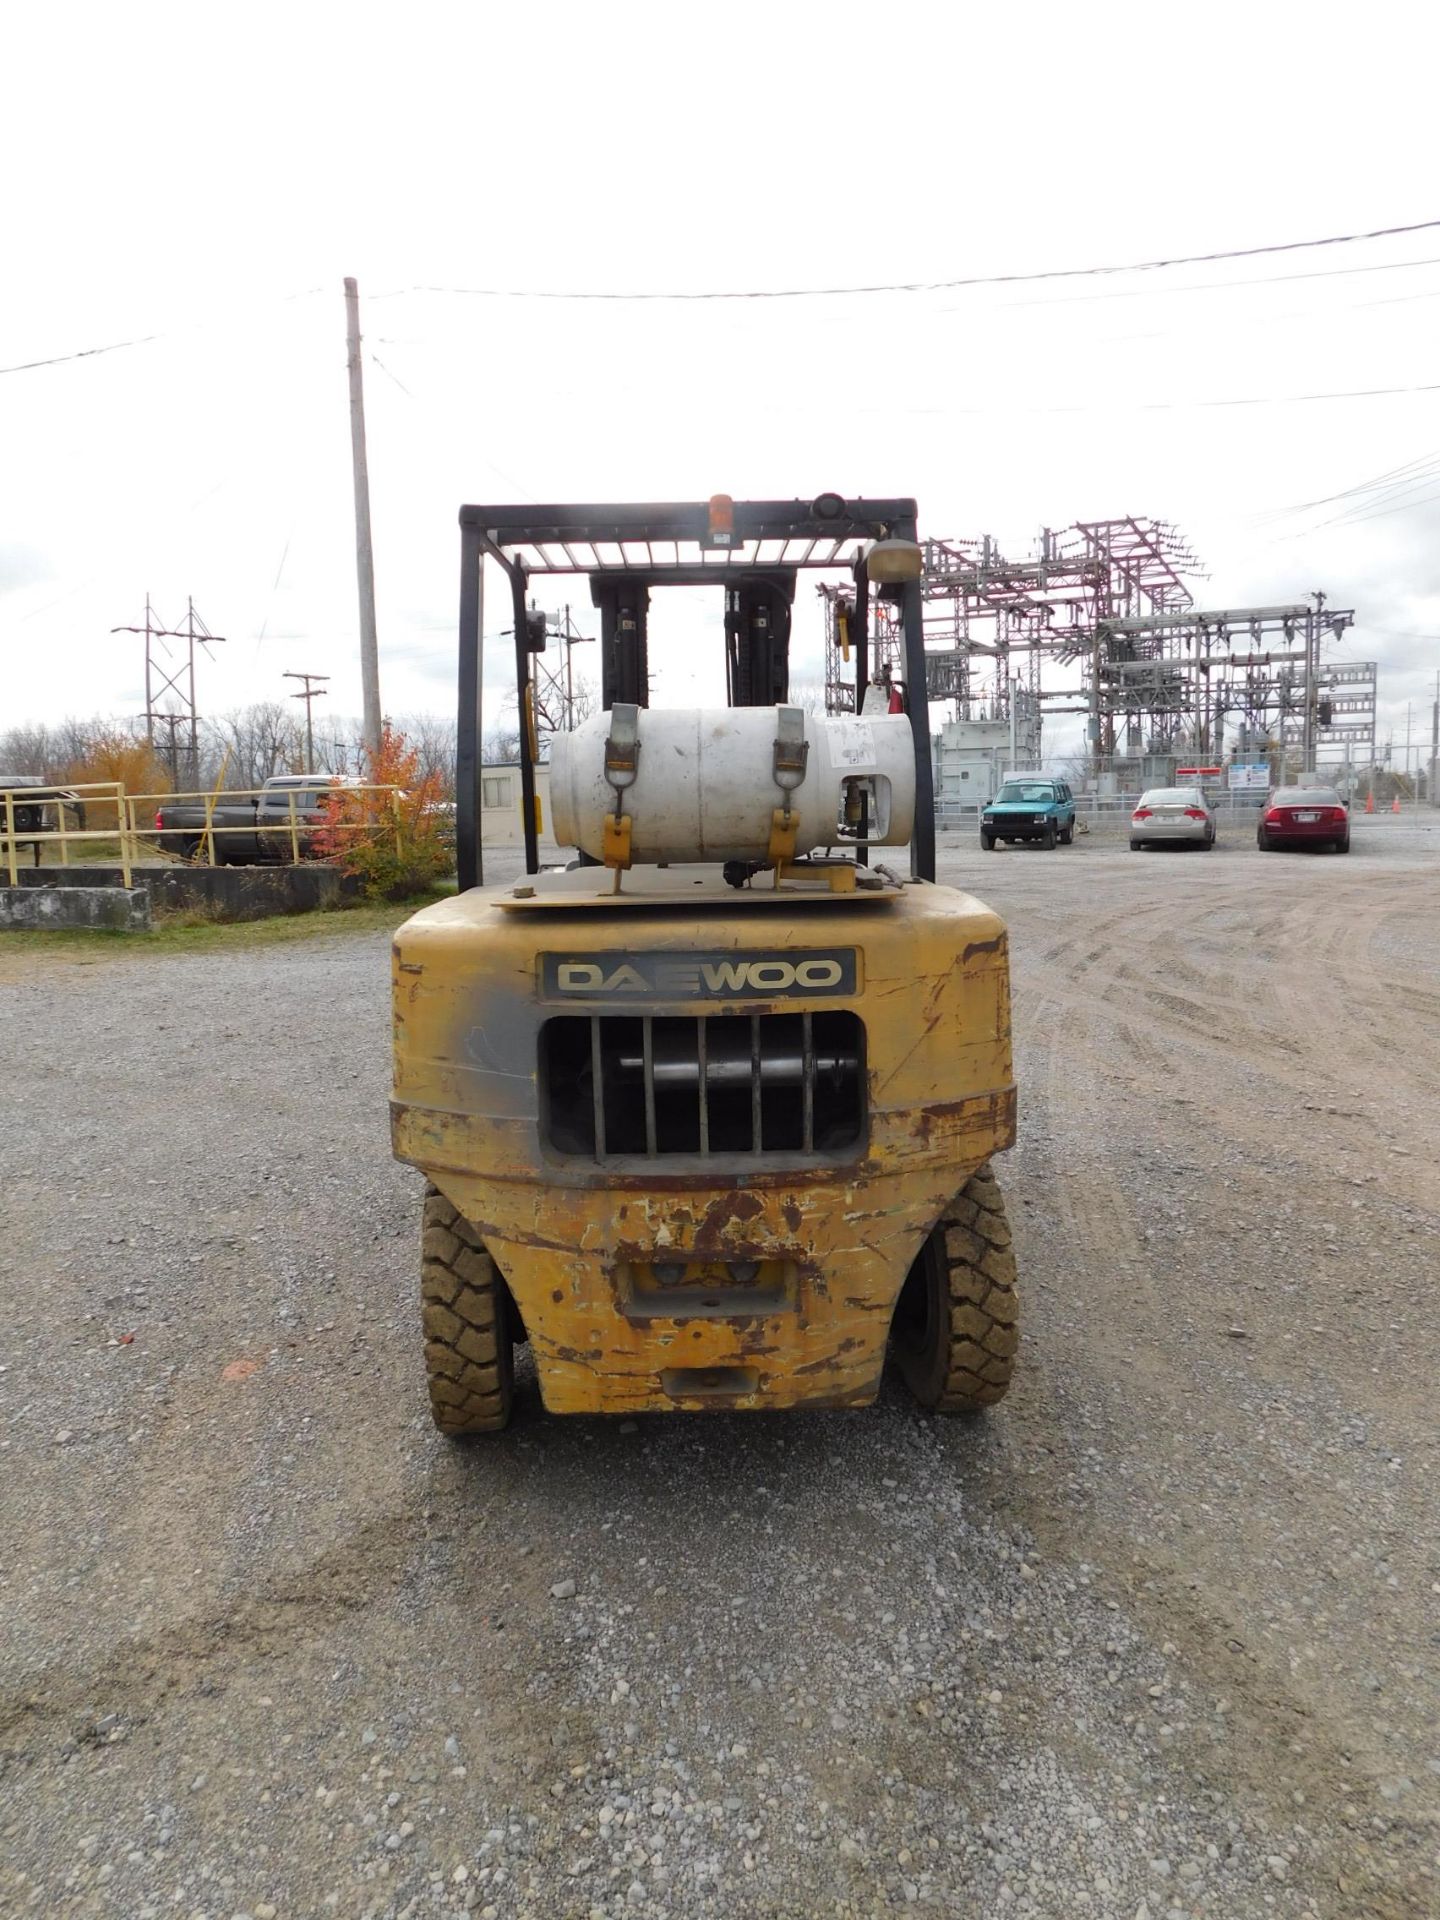 Daewoo Model G35S-2 Forklift, SN G2-00191, 6,700 lb. cap., LP, Solid Pneumatic Non-Marking Tires, - Image 5 of 20